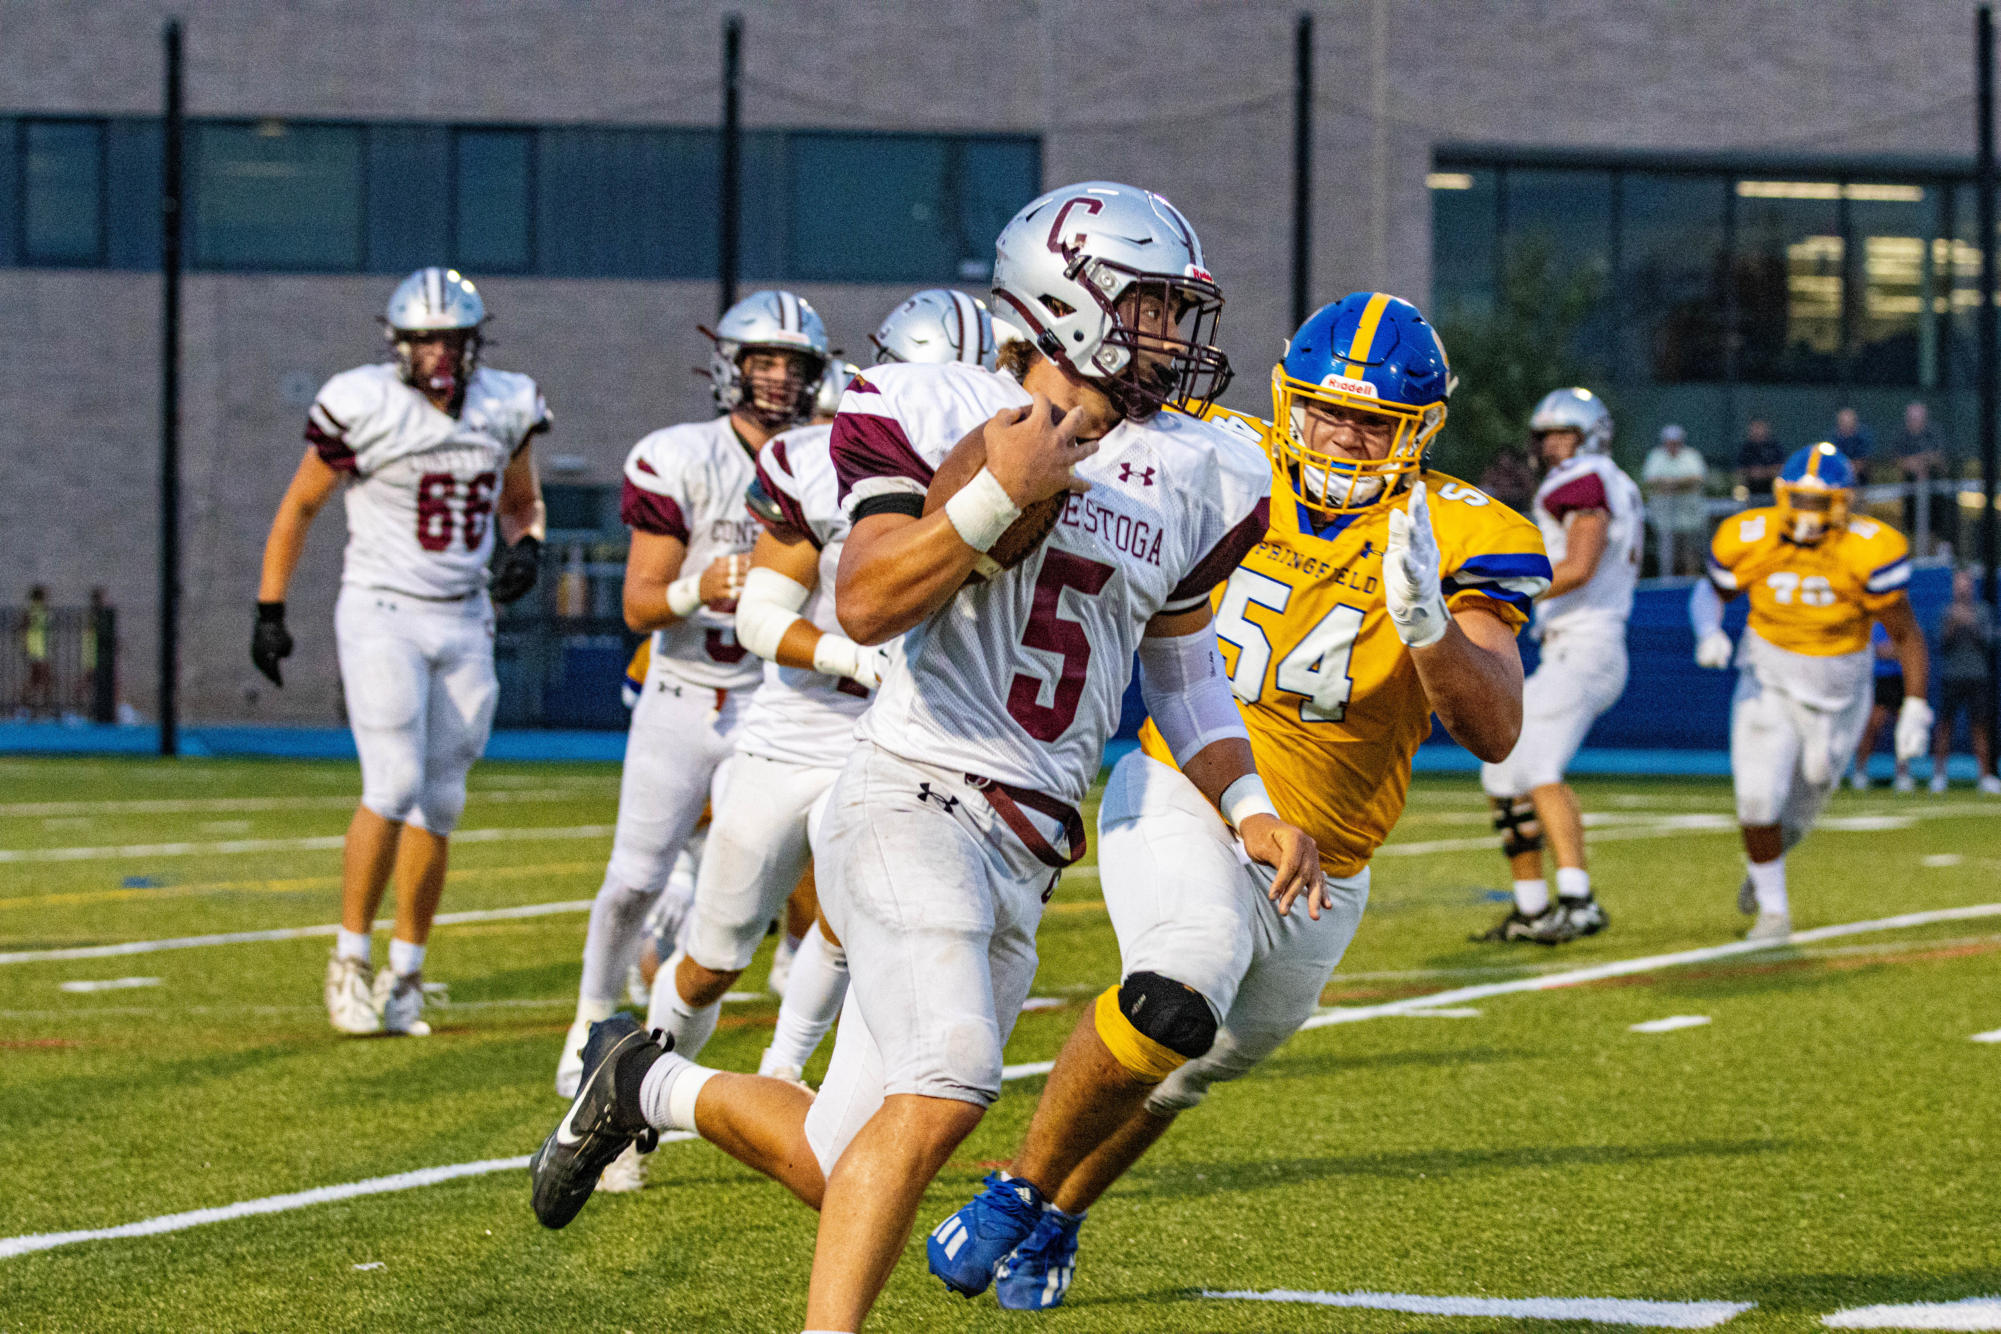 Conestoga Pioneers suffer 14-7 defeat against formidable Springfield Cougars